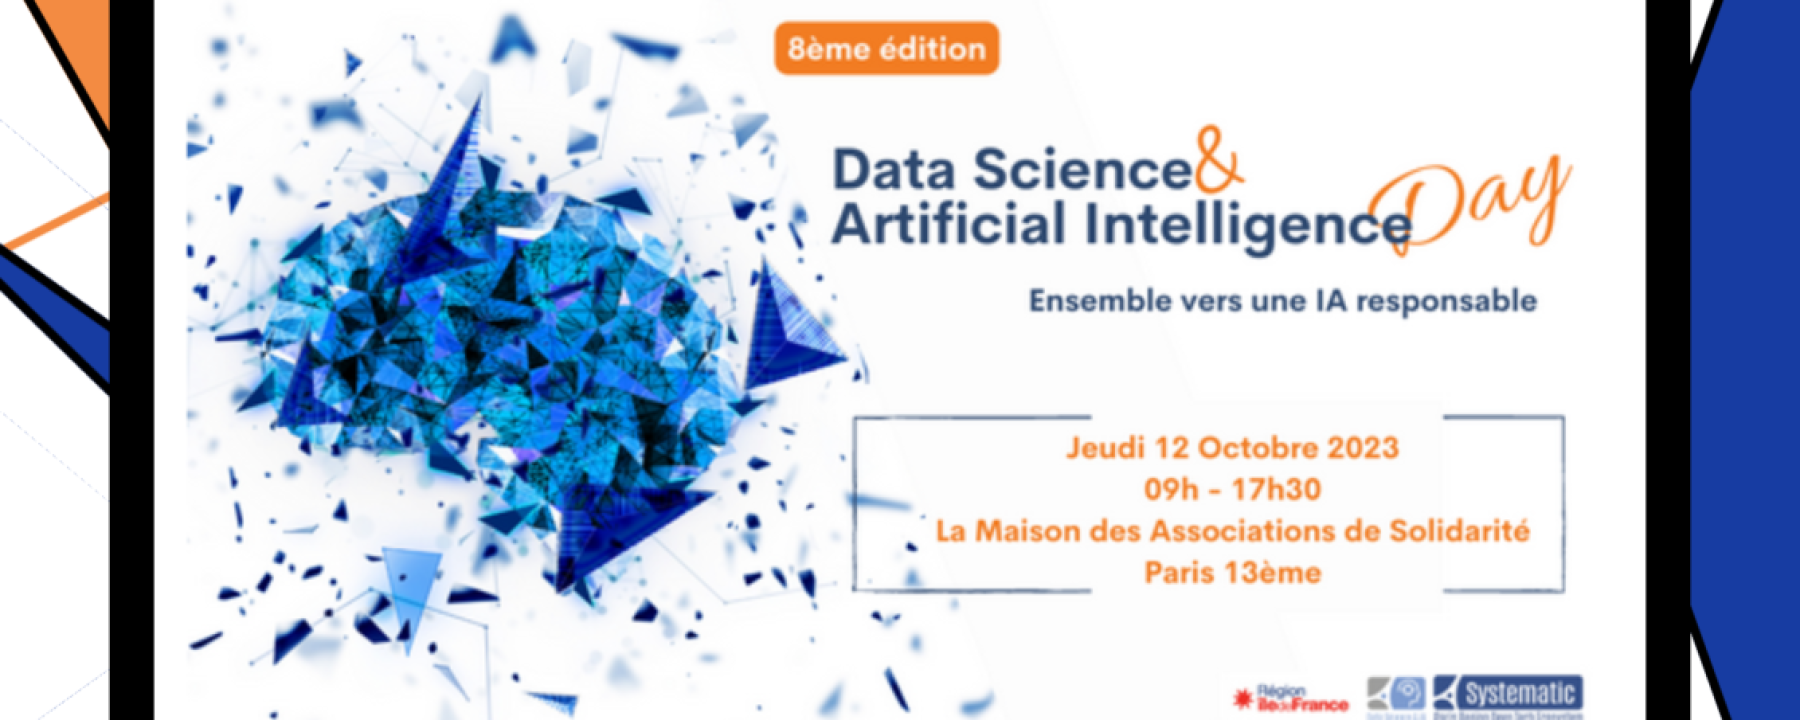 Data Science & Artificial Intelligence Day